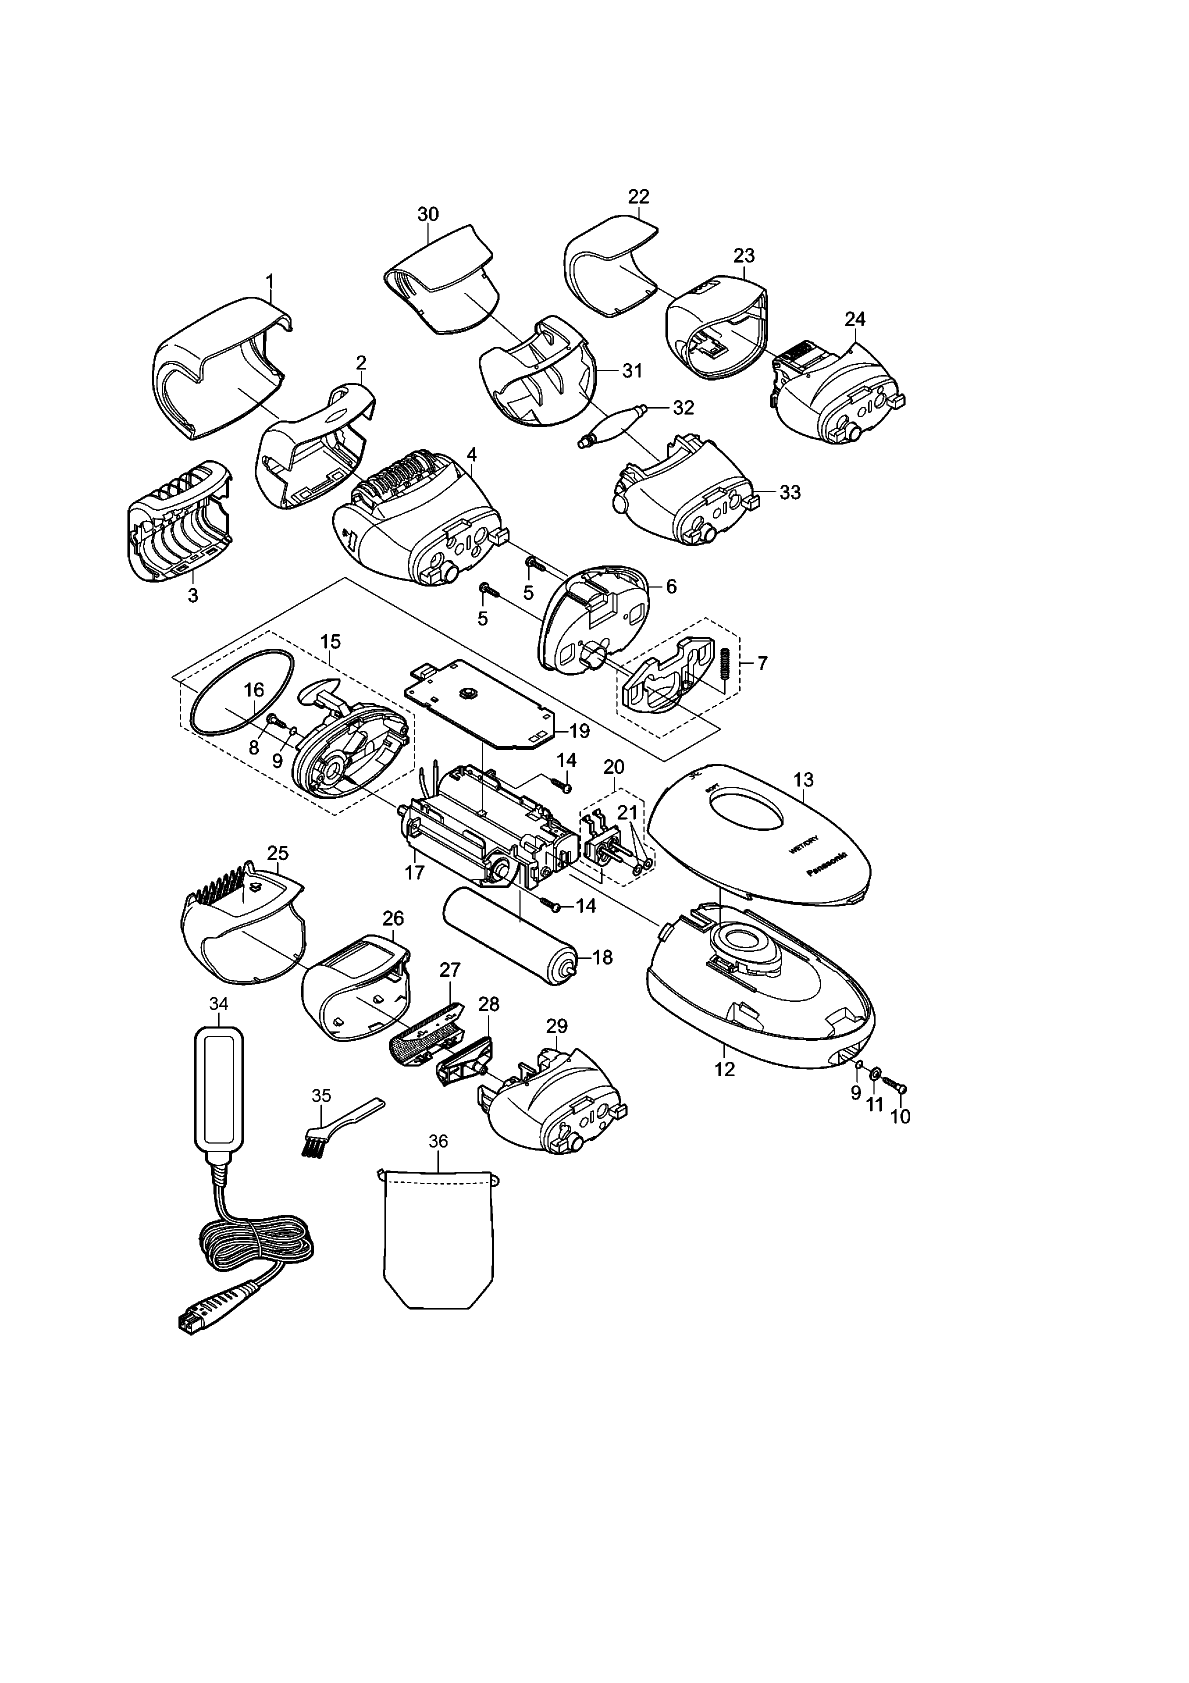 ES-ED92: Exploded View